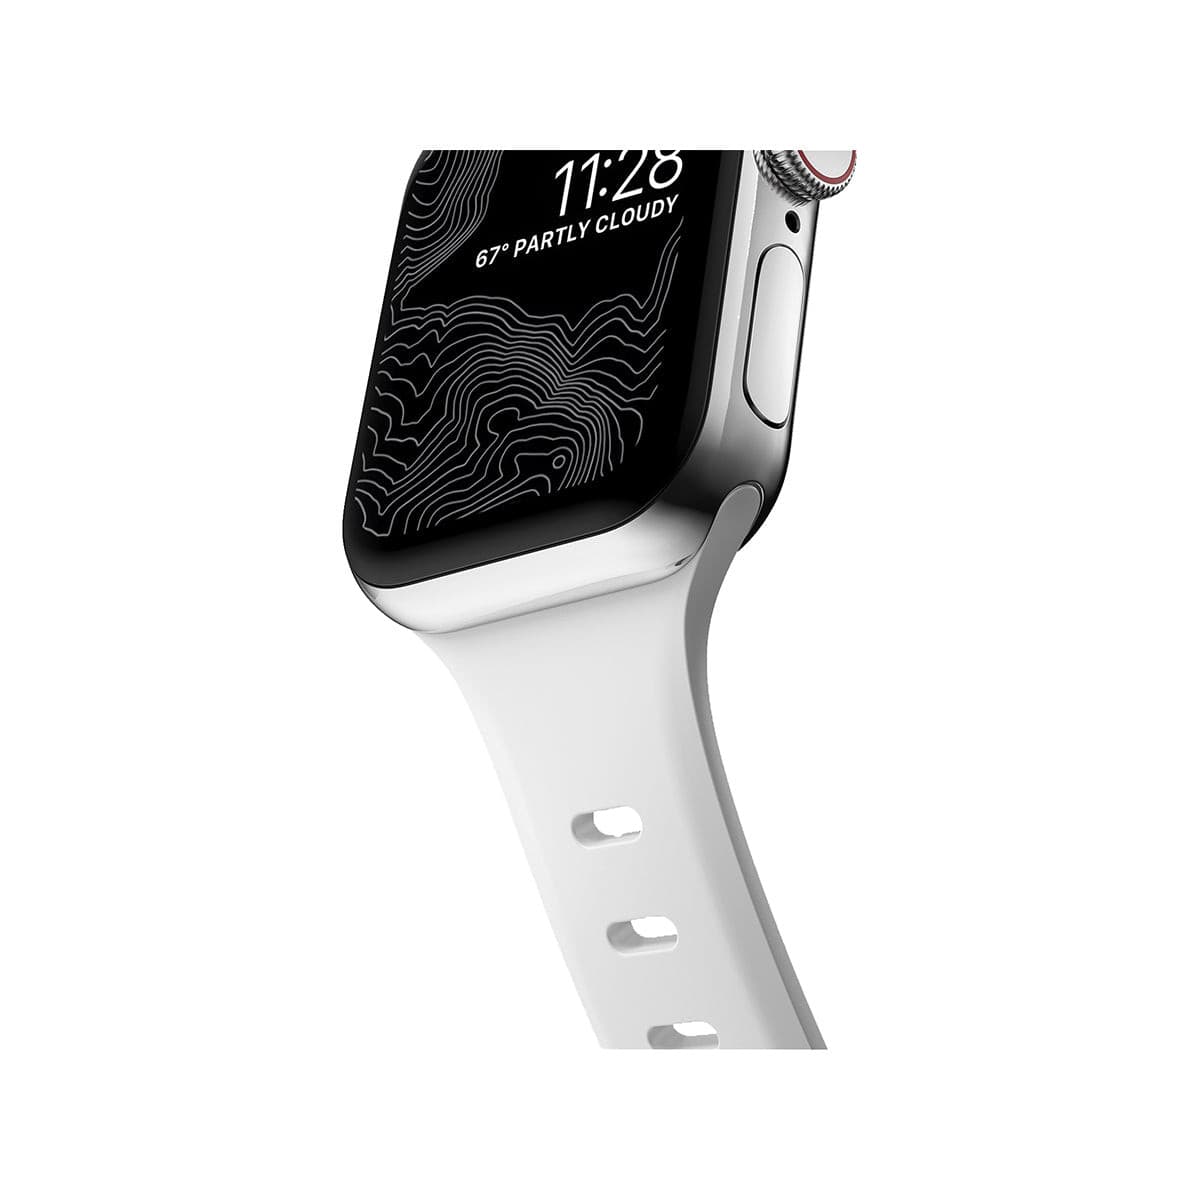 NOMAD Sport Slim 41mm Band for Apple Watch - White.